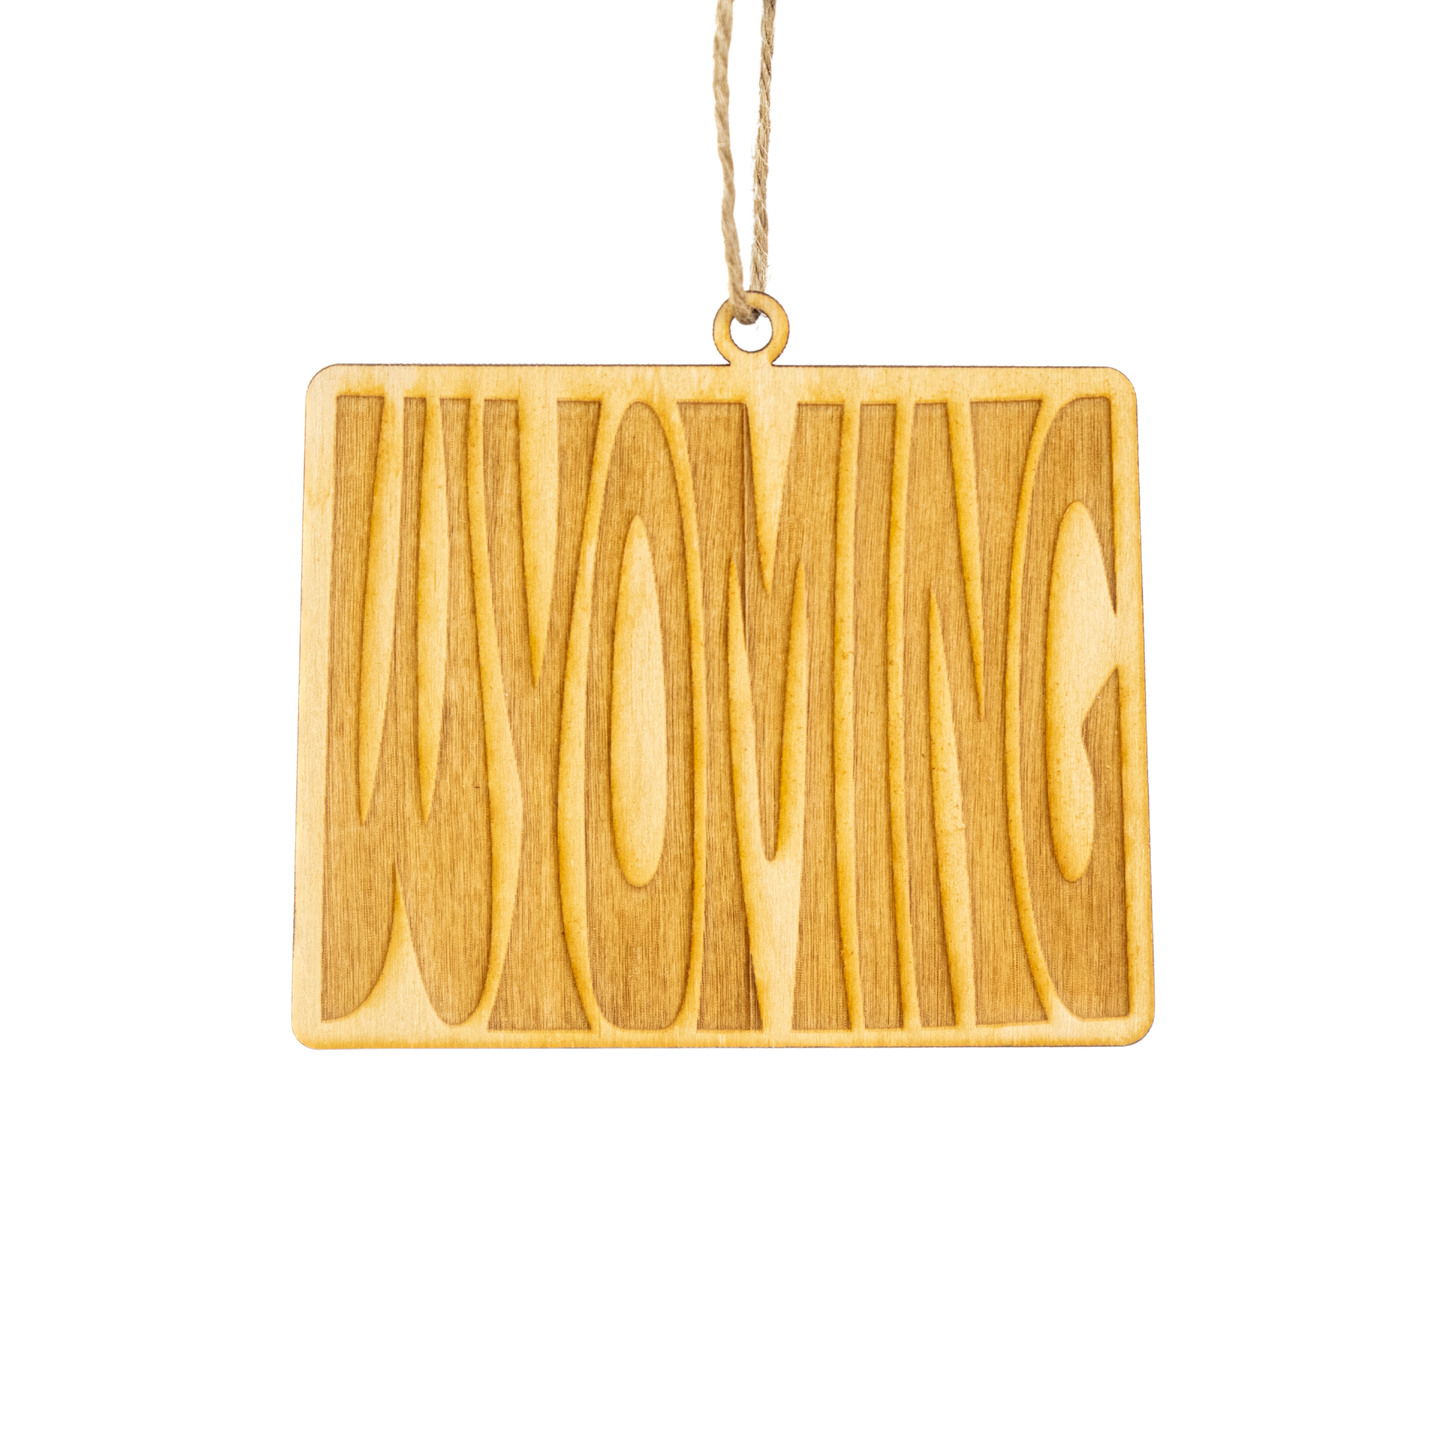 Wyoming State Name Ornament